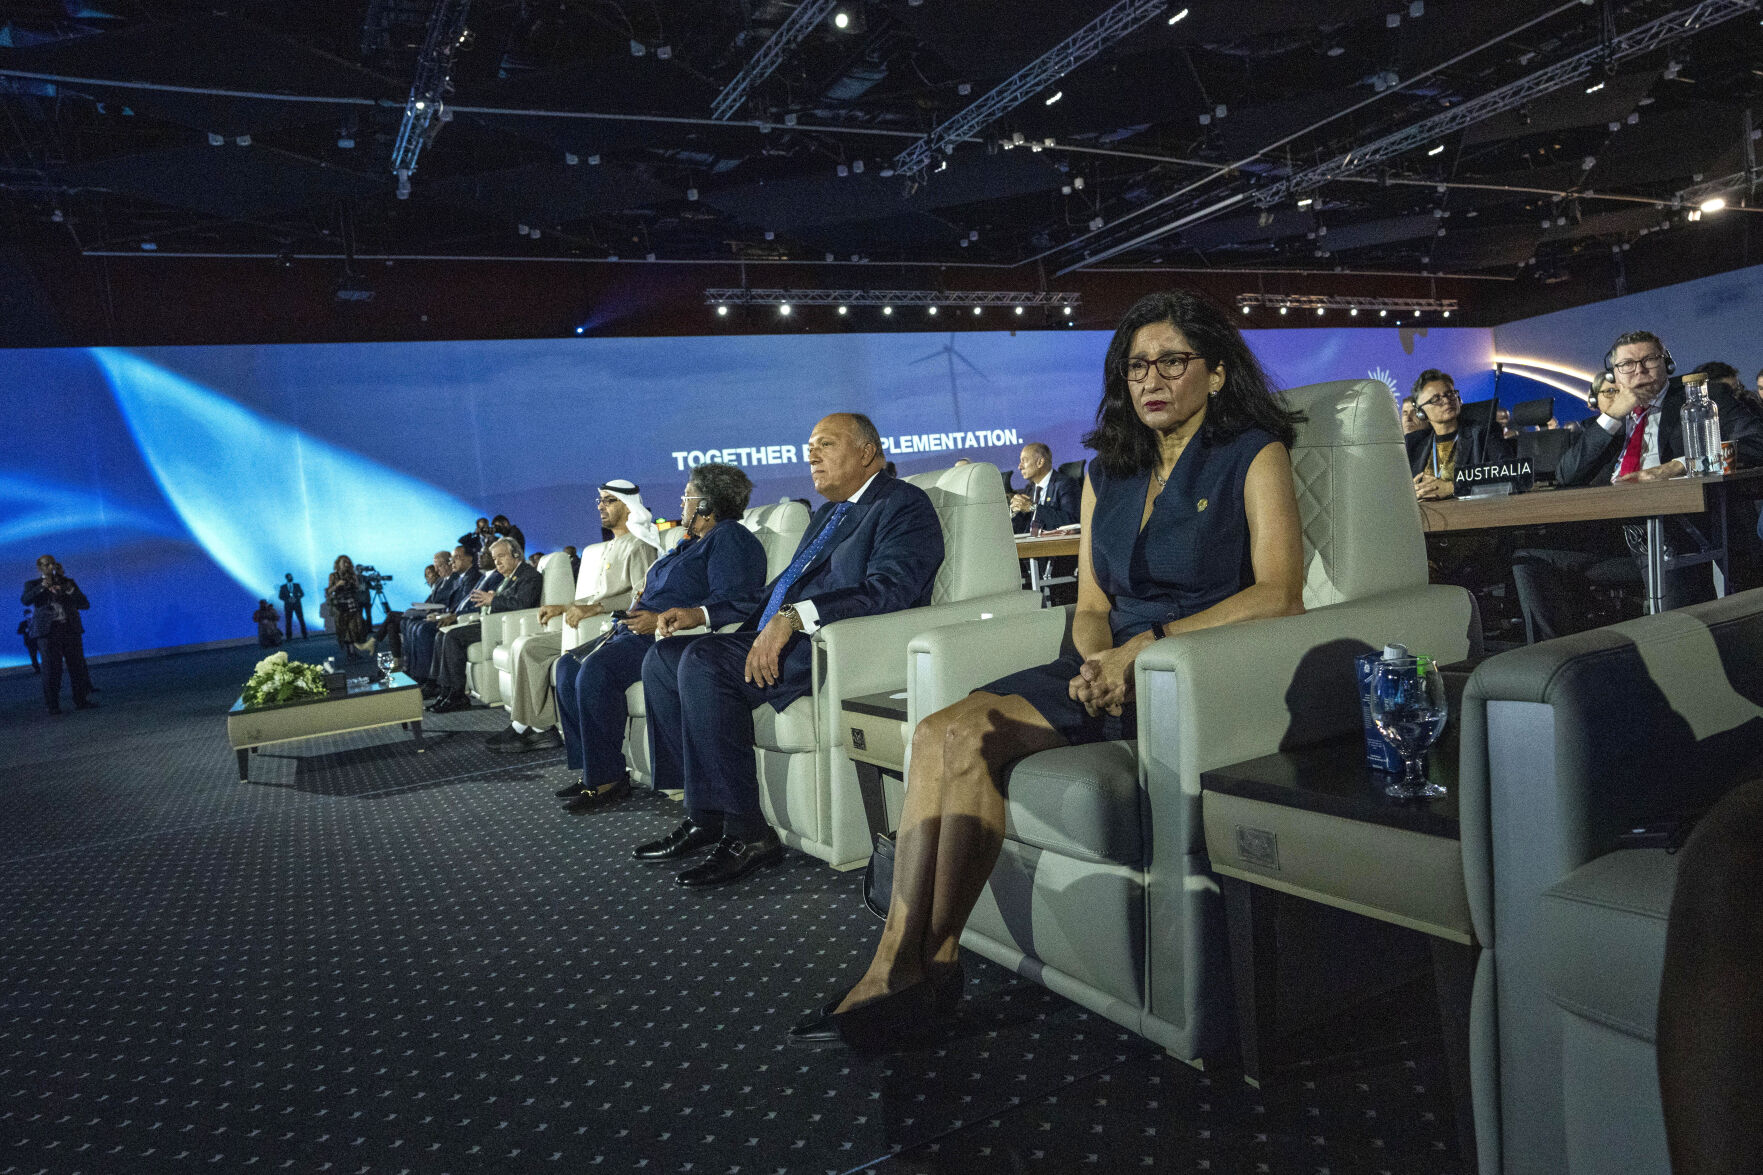 <p>Baroness Minouche Shafik, London School of Economics Director, right, listens to Egyptian President Abdel Fattah el-Sissi, as he gives a speech during the COP27 U.N. Climate Summit, in Sharm el-Sheikh, Egypt, Monday, Nov. 7, 2022. (AP Photo/Nariman El-Mofty)</p>   PHOTO CREDIT: Nariman El-Mofty - staff, AP